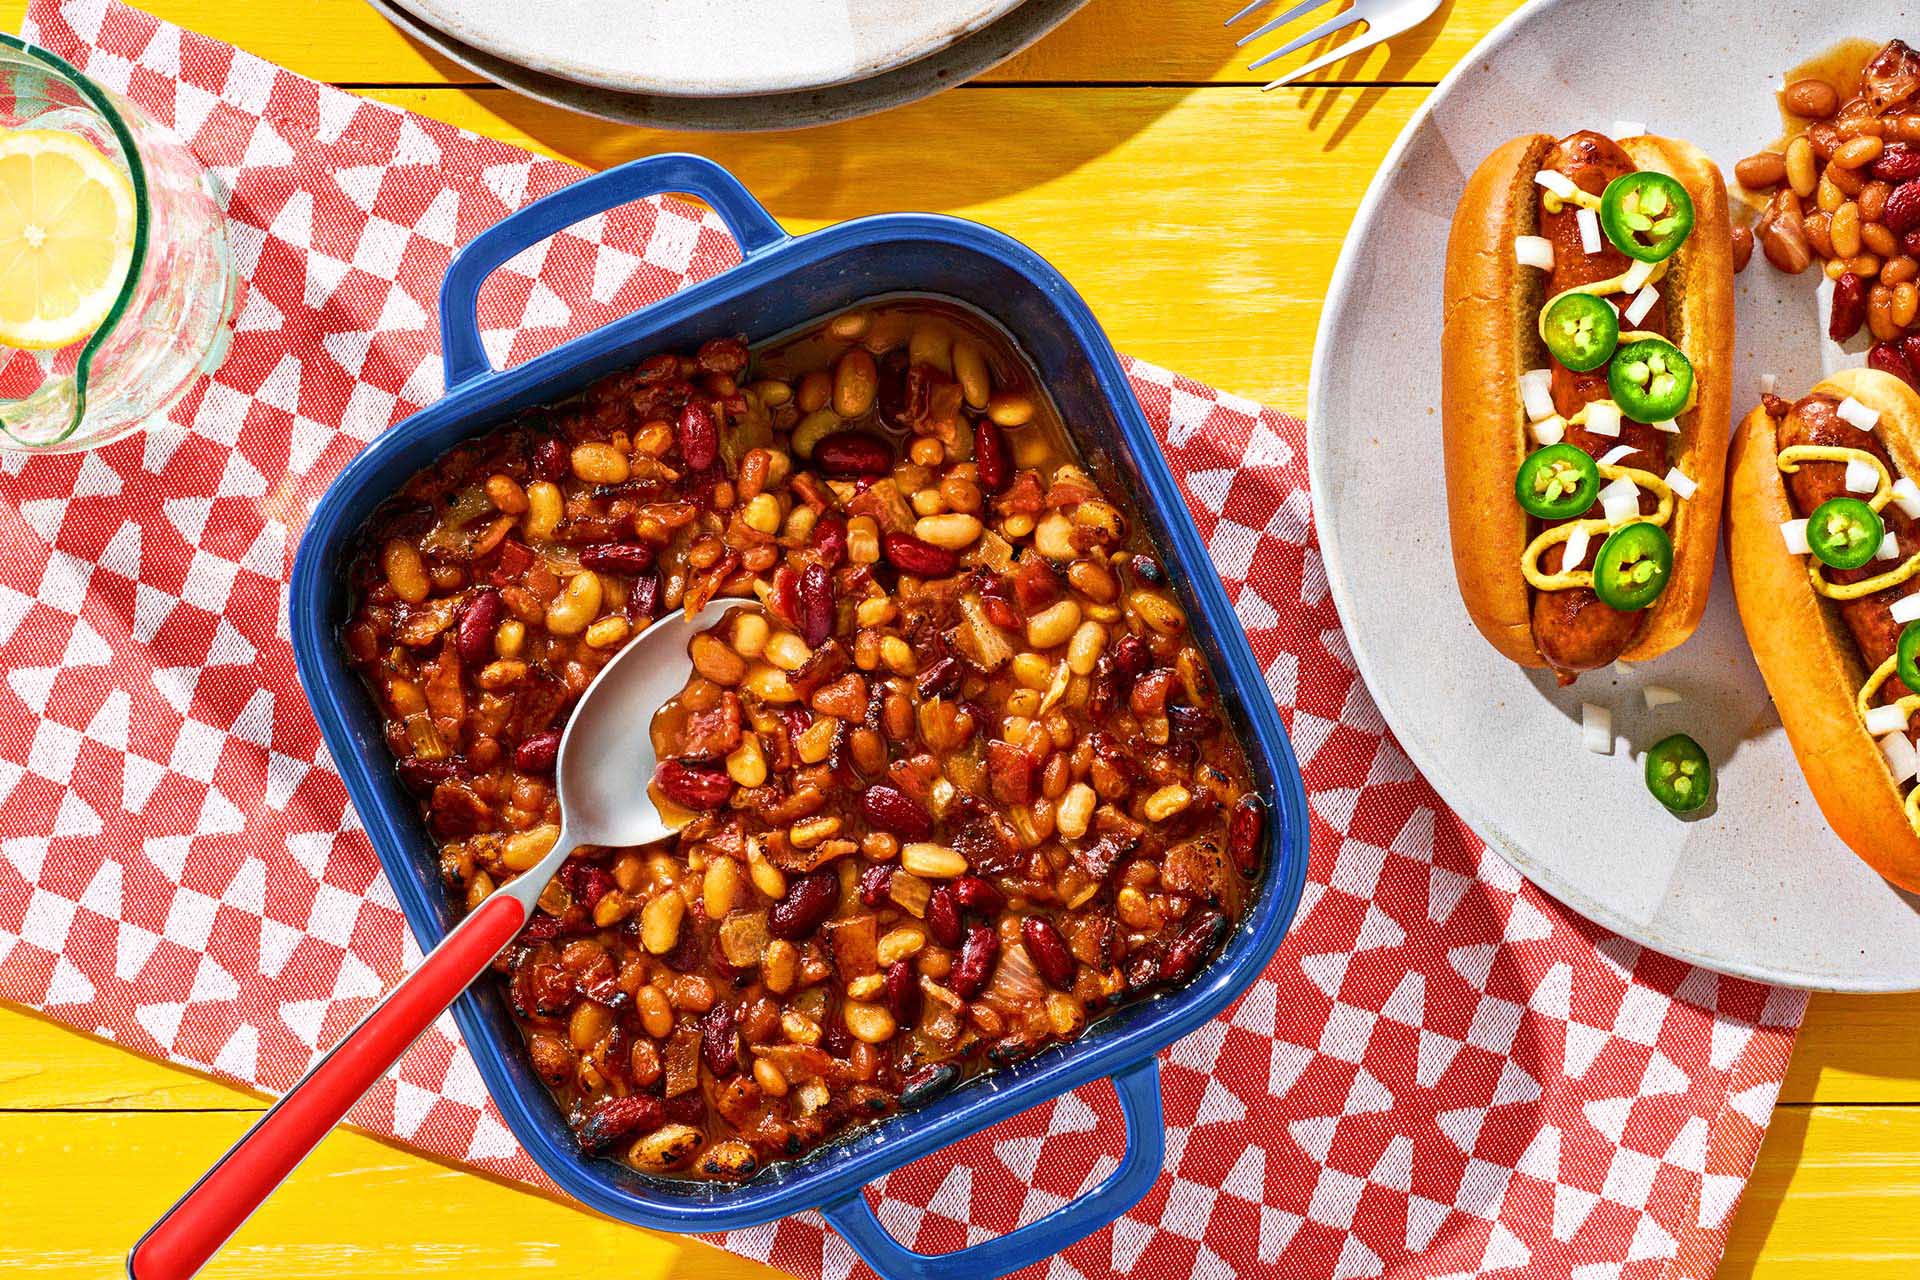 Baked Beans Casserole in a blue enamel dish atop a colorful napkin.